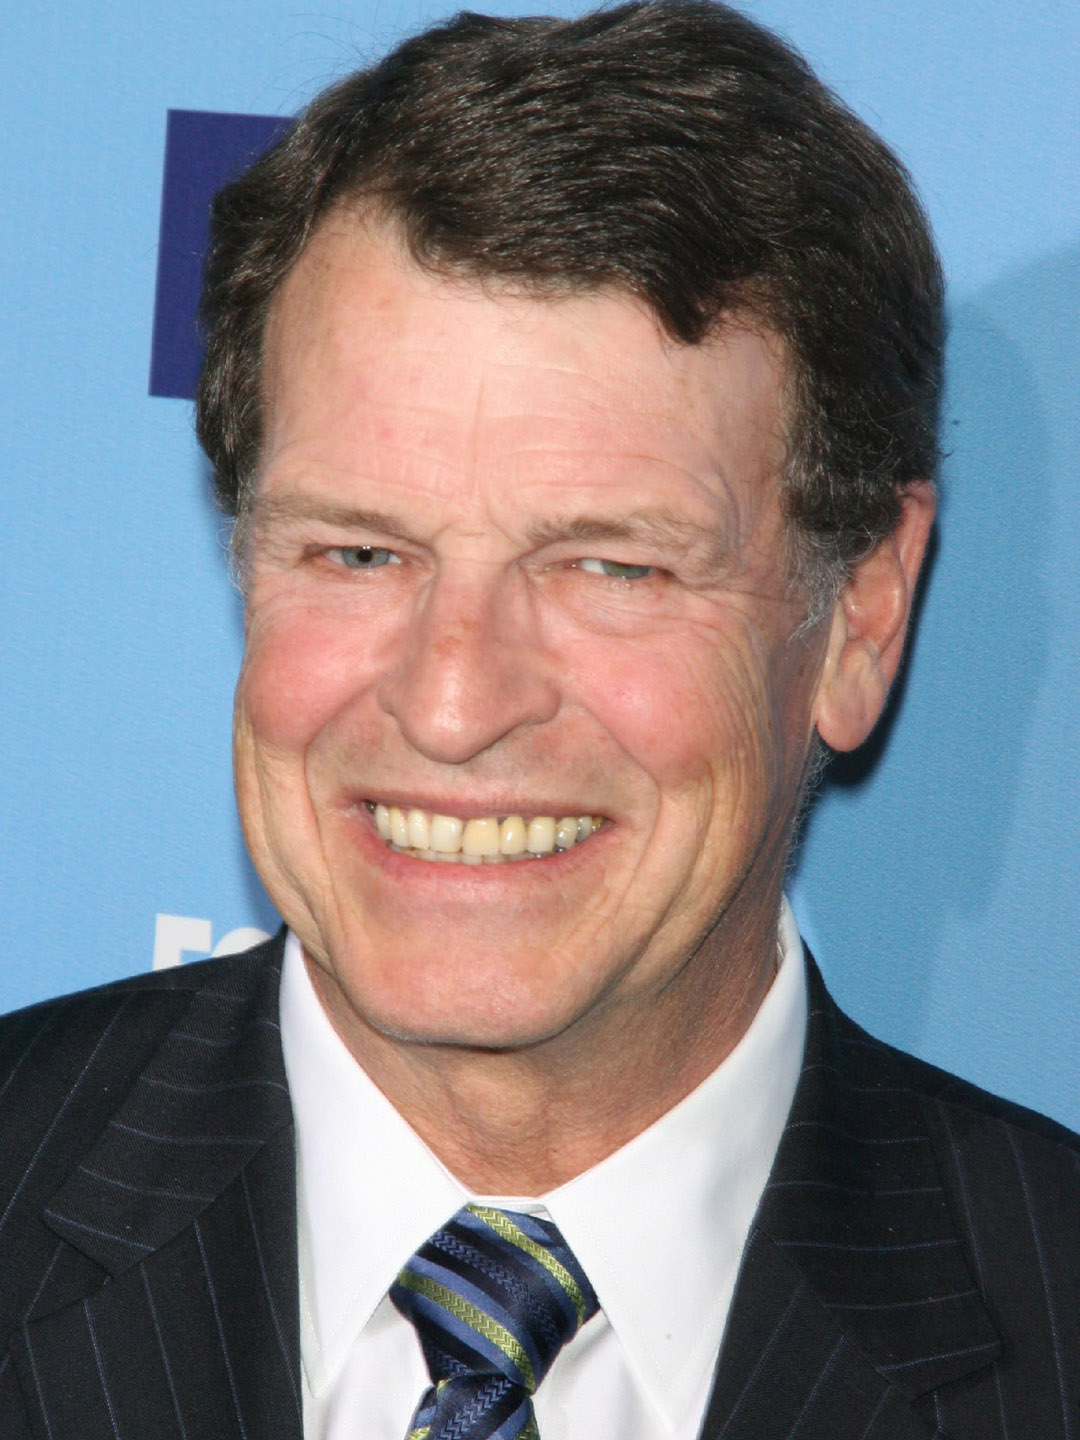 How tall is John Noble?